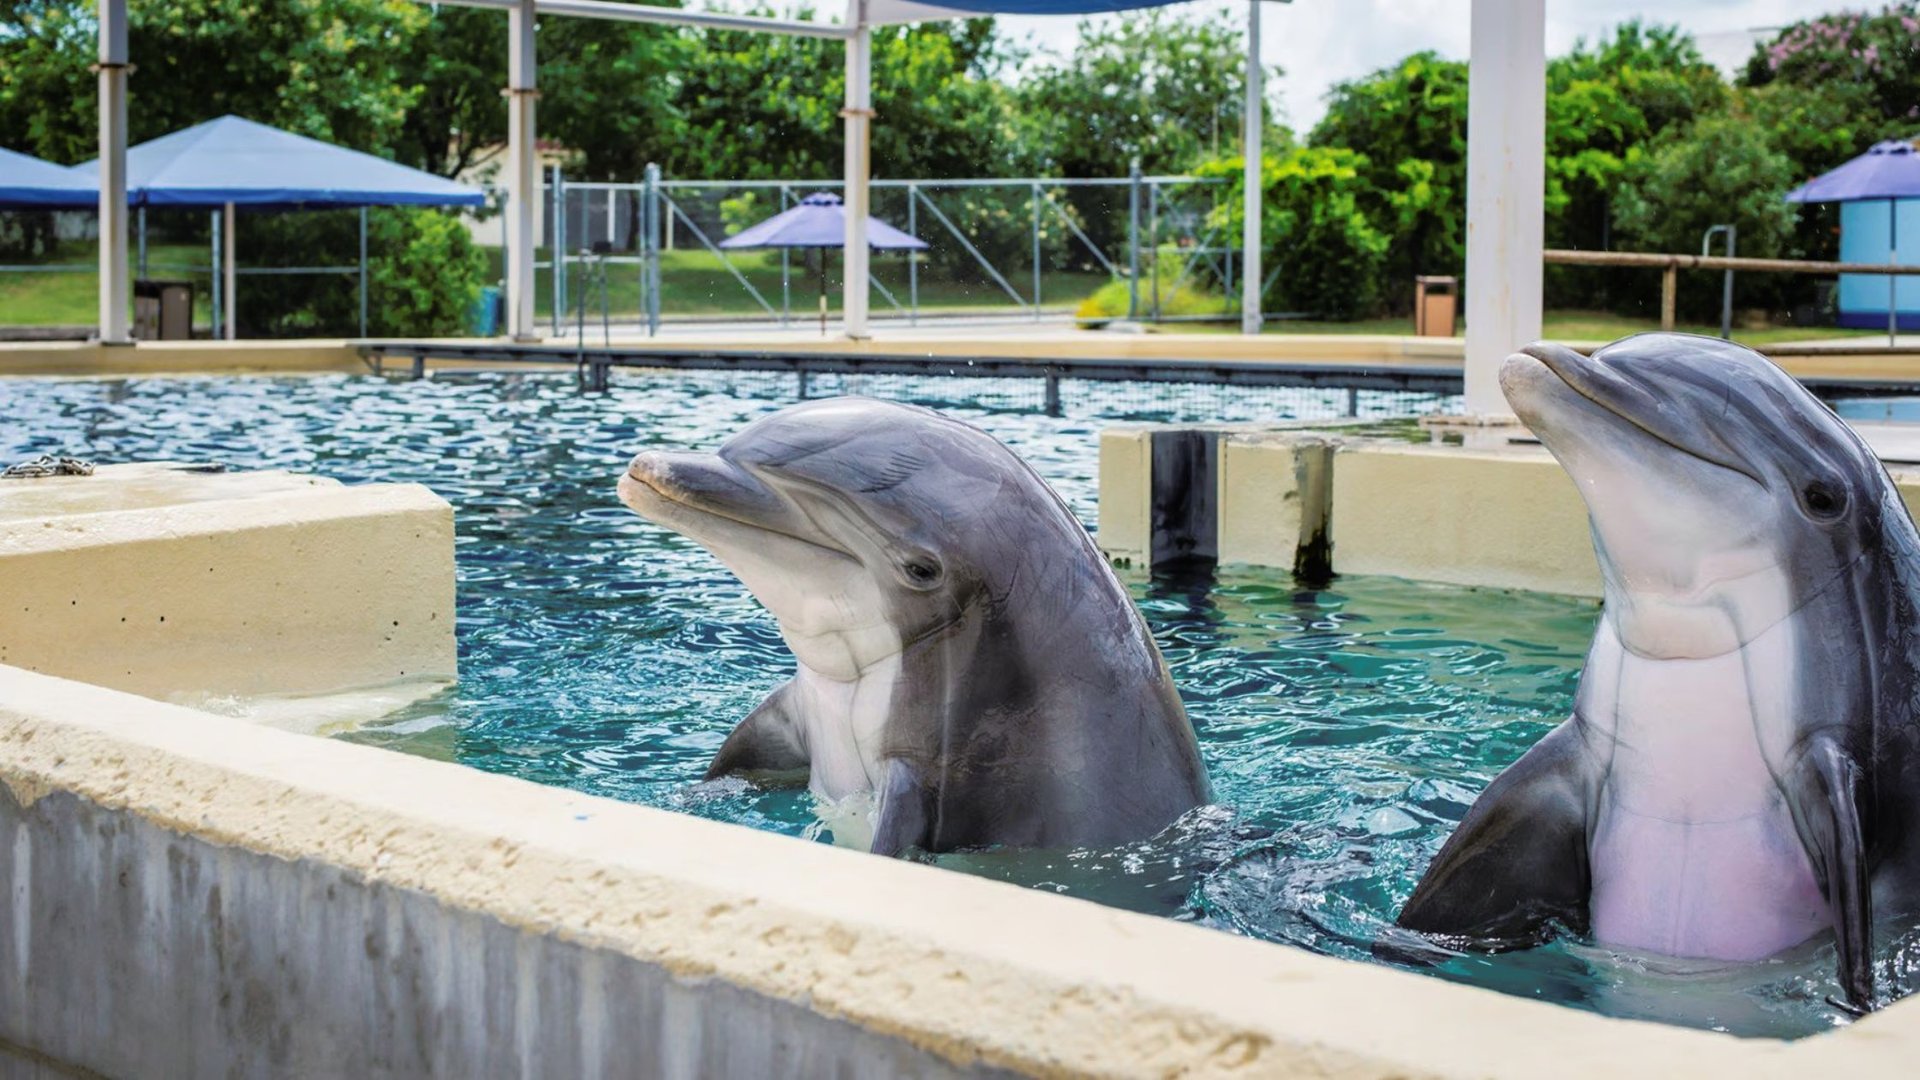 Captive dolphins in a pool.